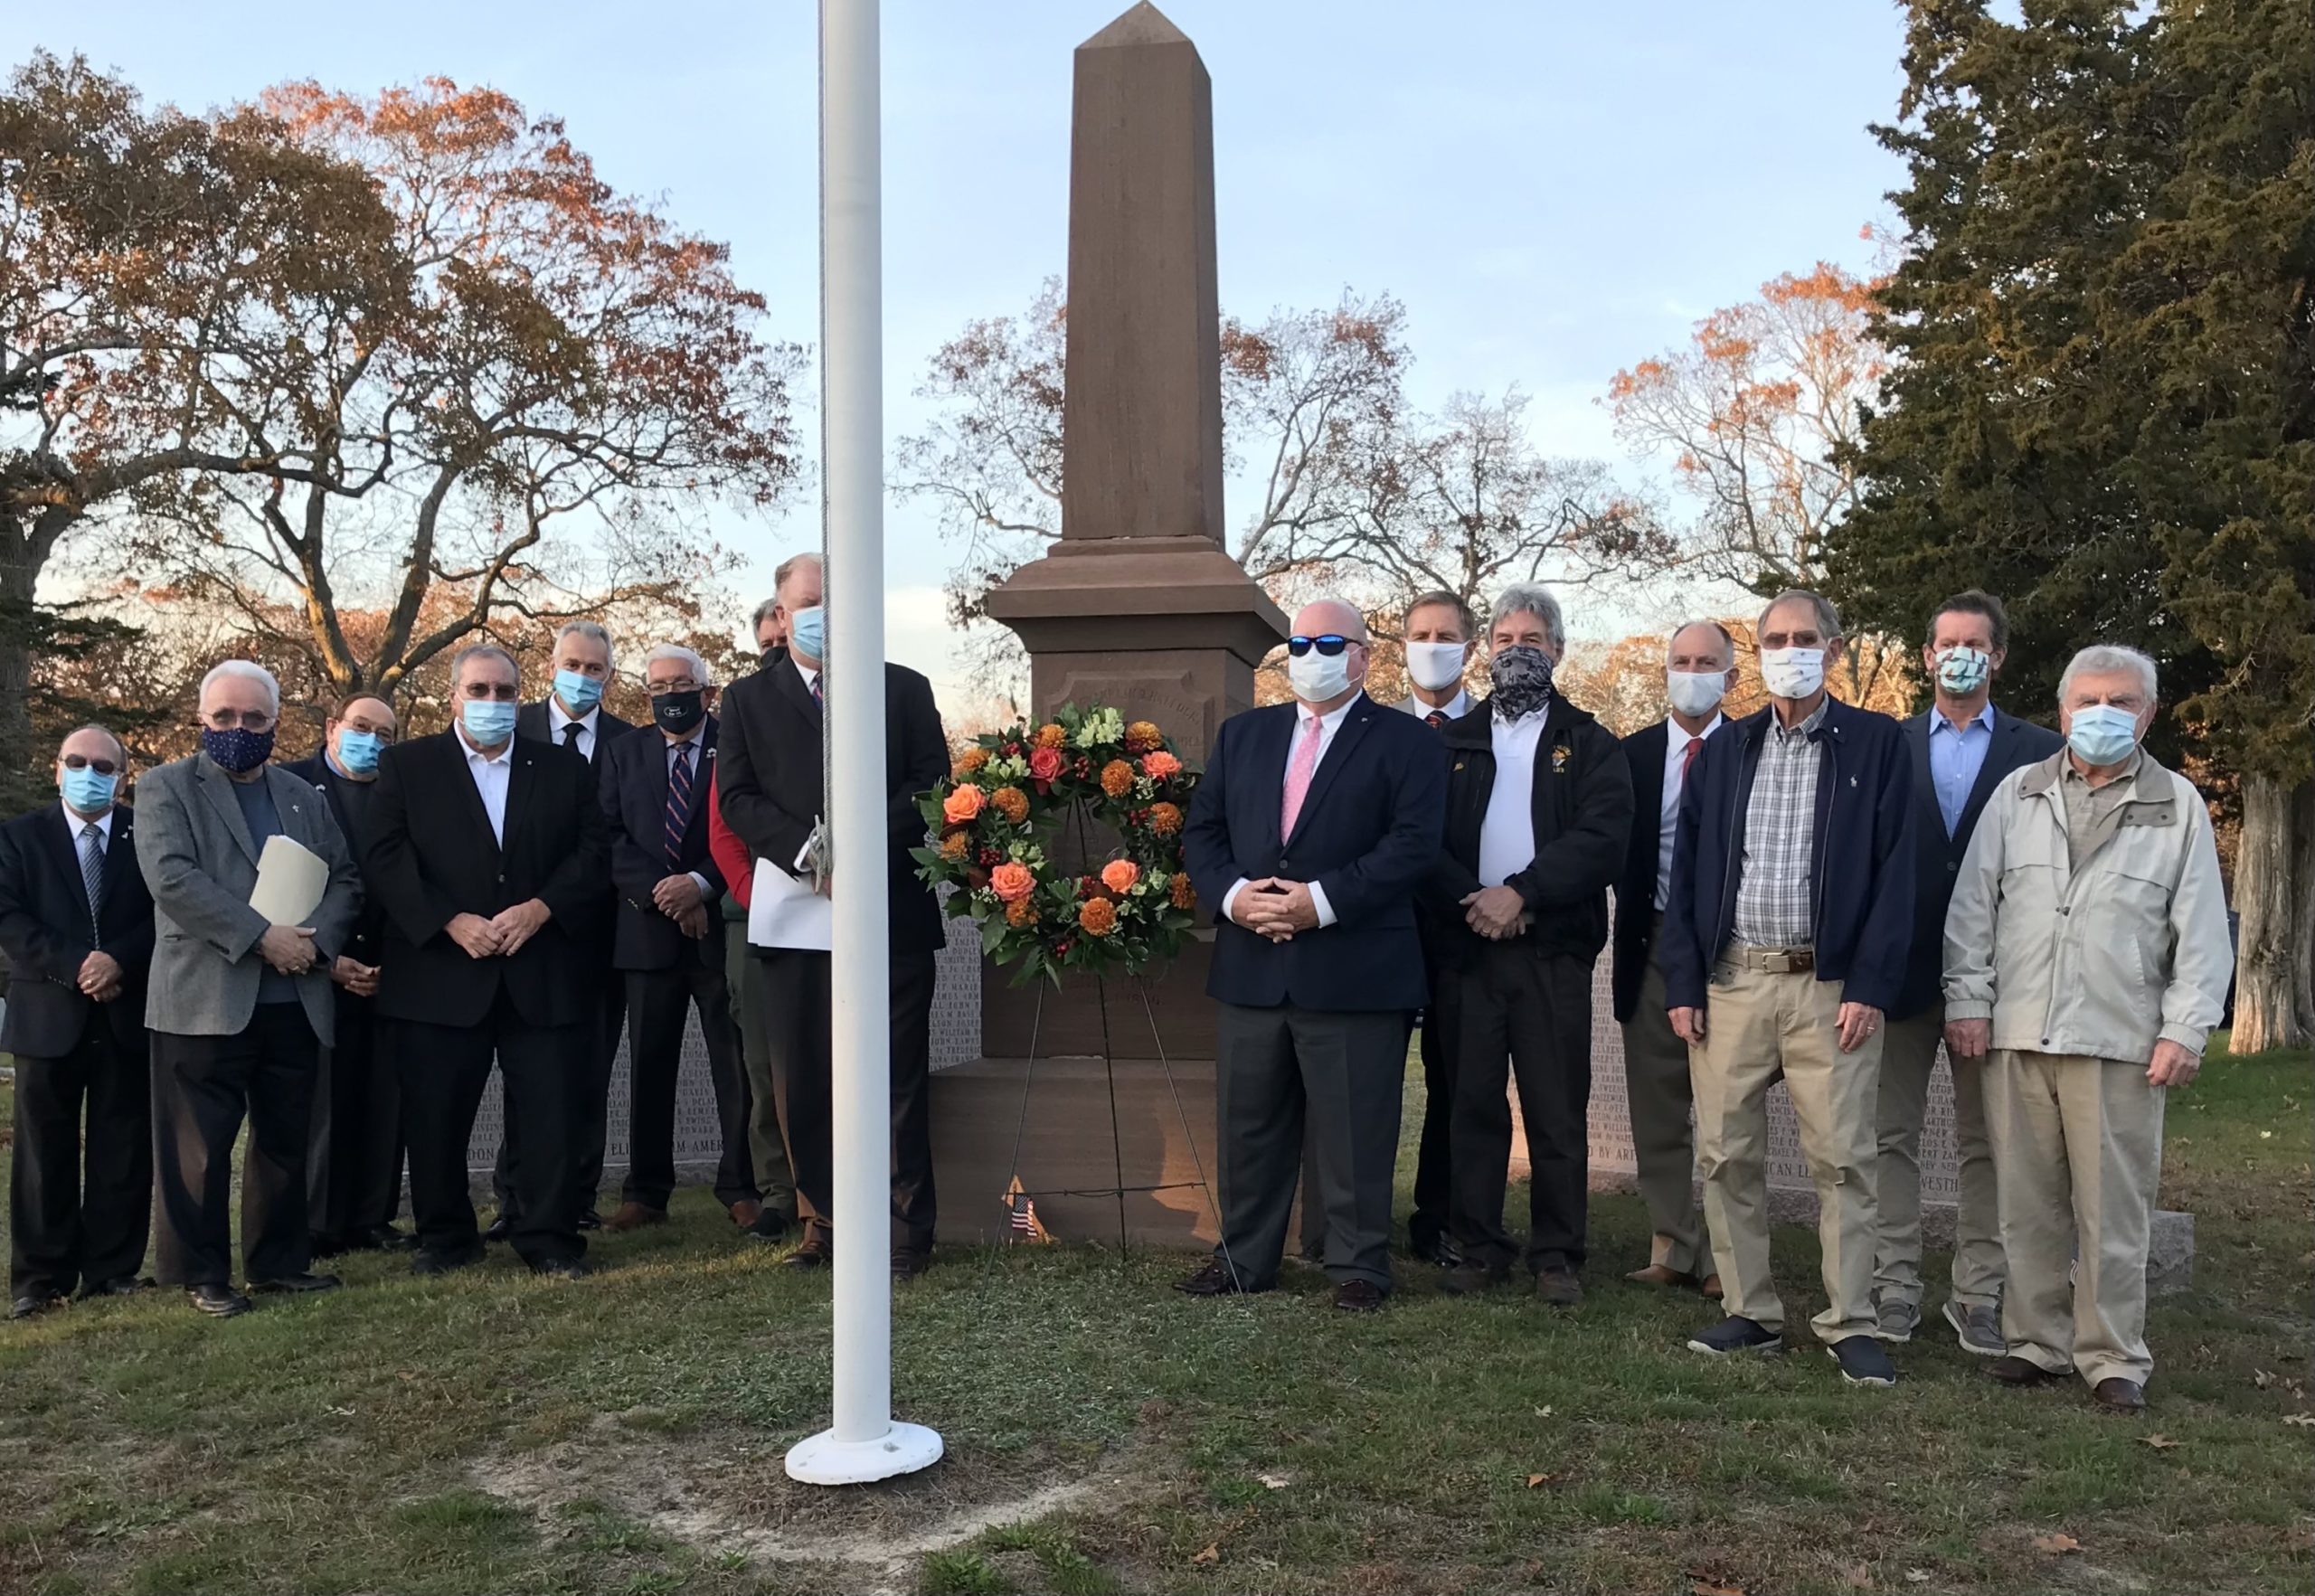 Members of the Knights of Columbus Council Father Joseph Slomski #7423 honored local military recently, placing a wreath at the Westhampton Cemetery near the war memorial. 